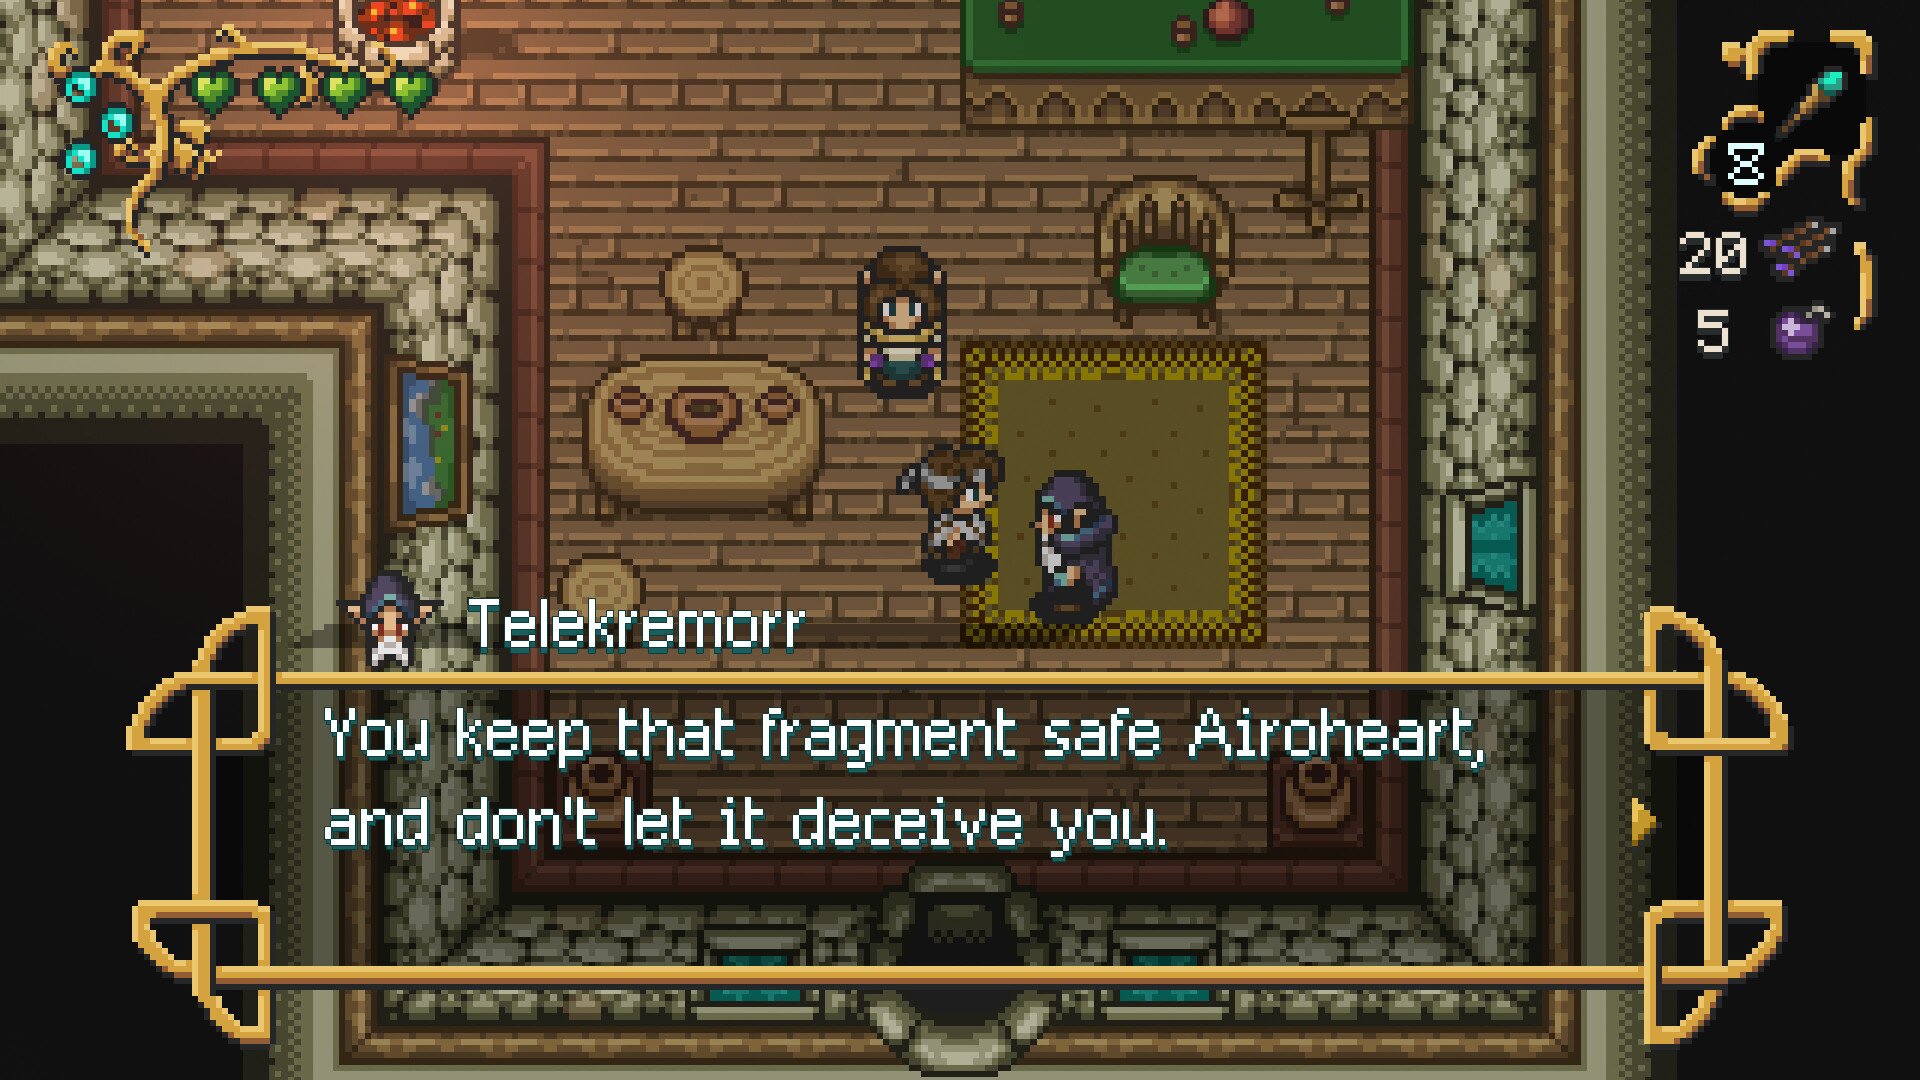 Airoheart for windows download free